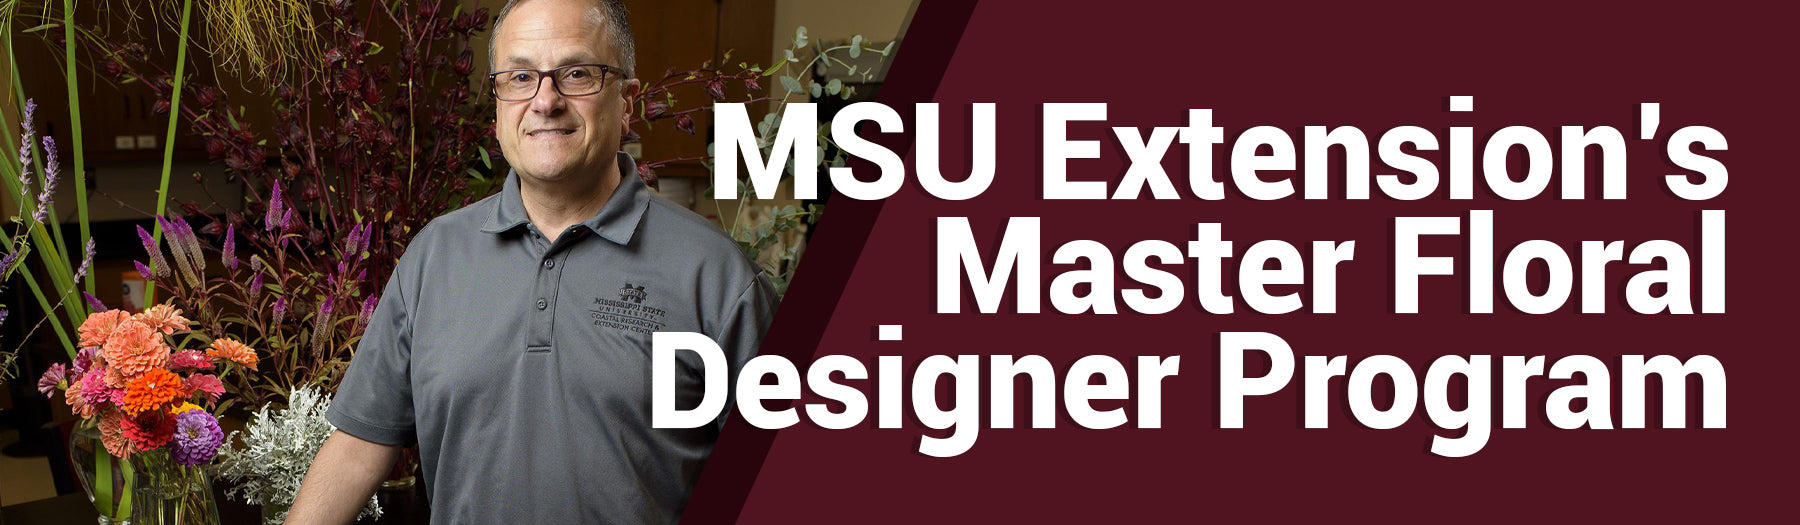 DESIGN MASTER, A Division of Smithers-Oasis Company